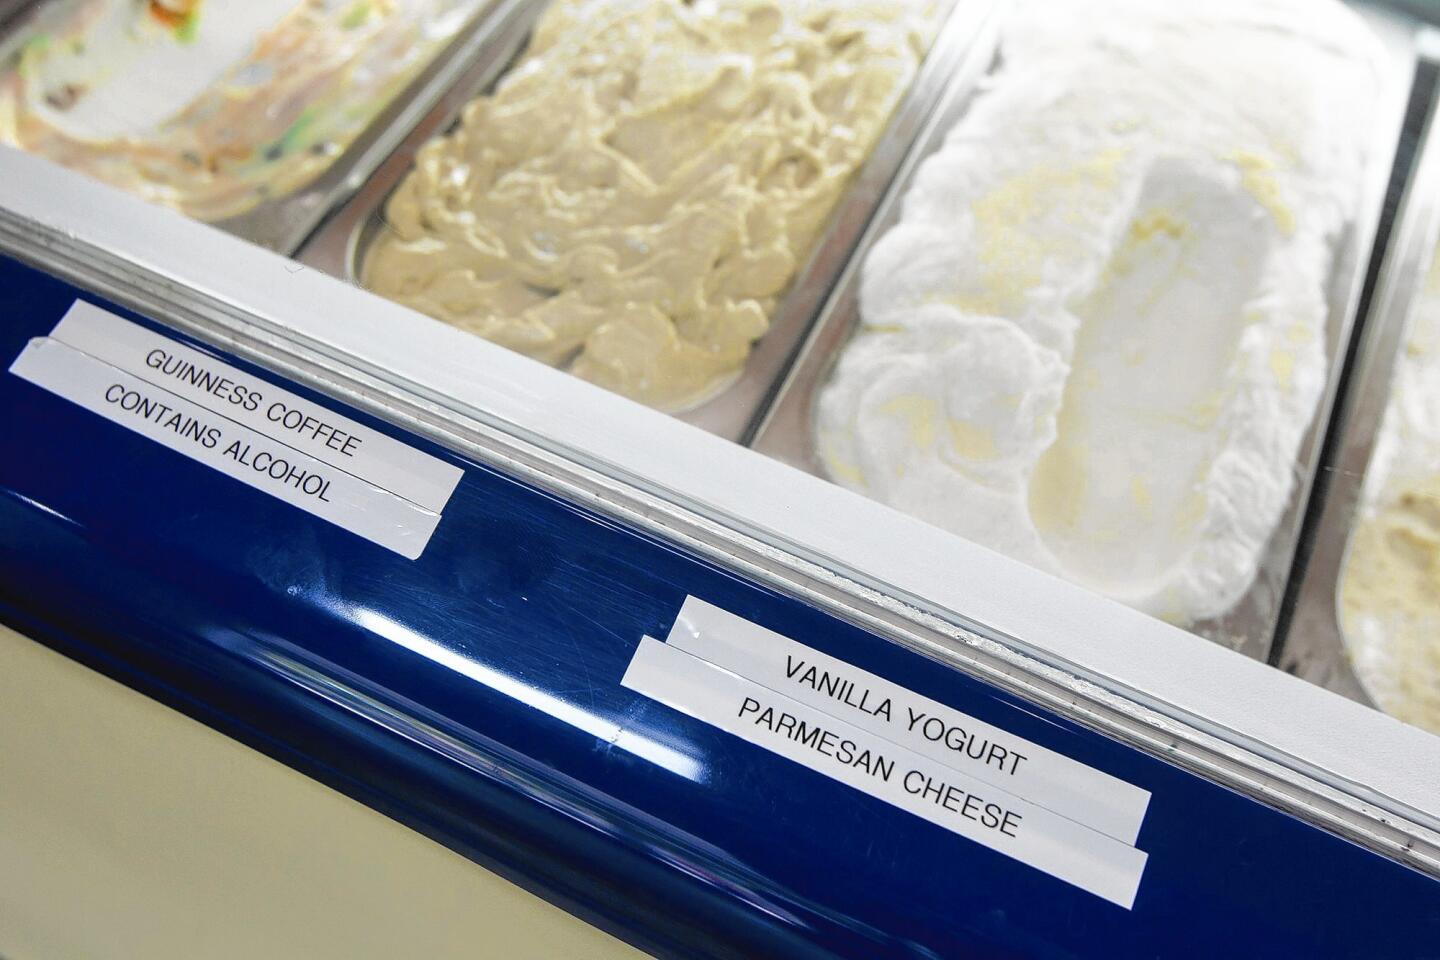 Unique flavors are part of the appeal at Scoops ice cream shop in Santa Ana.